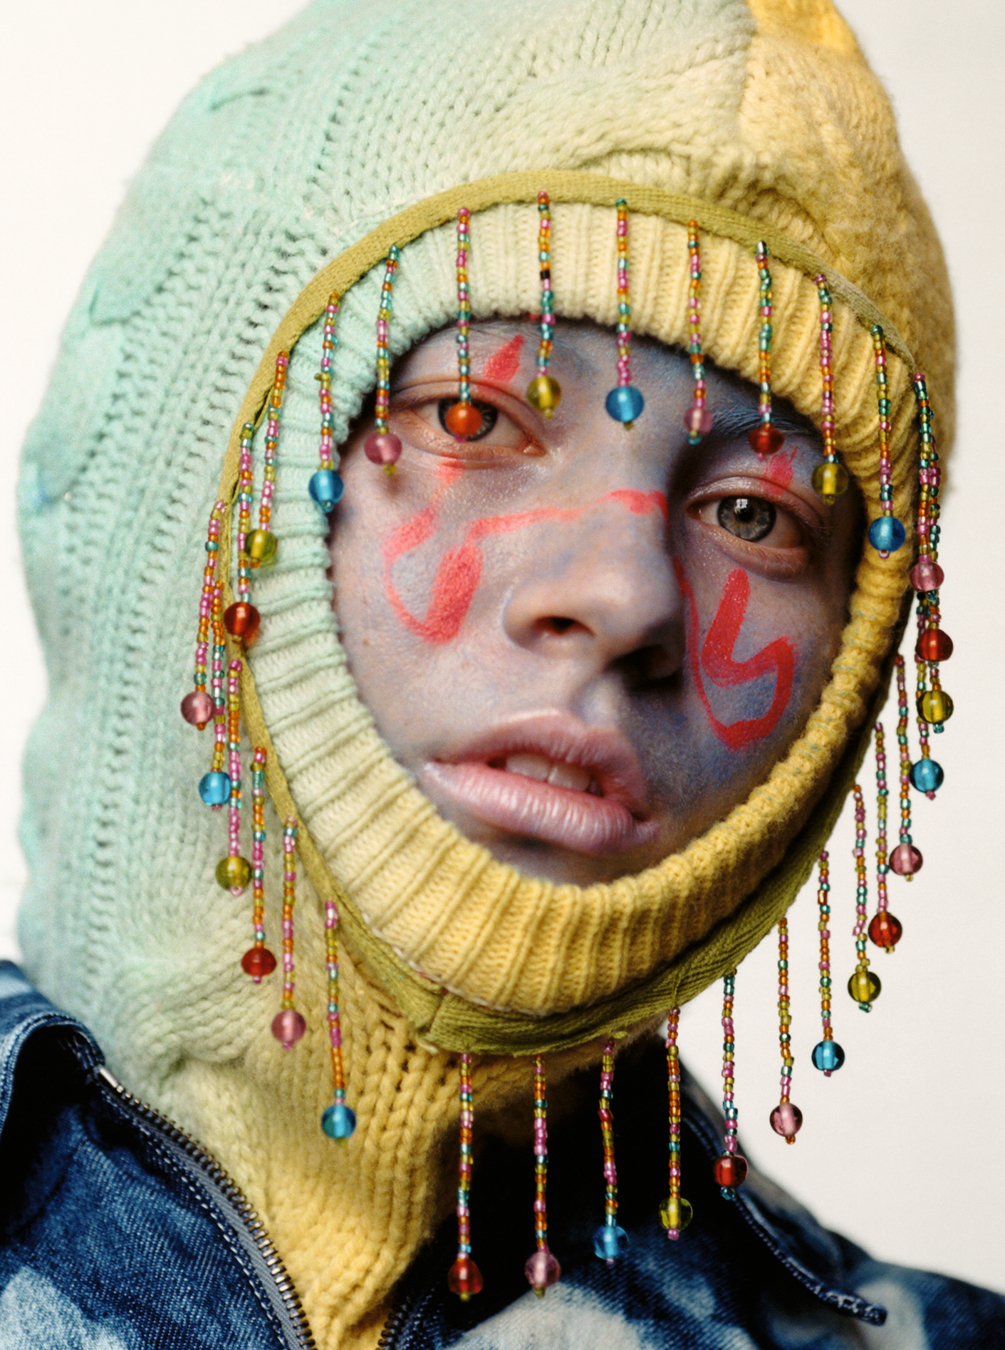 Lola + Pani photograph of a model wearing a balaclava with beats on it, with colourful facepaint on